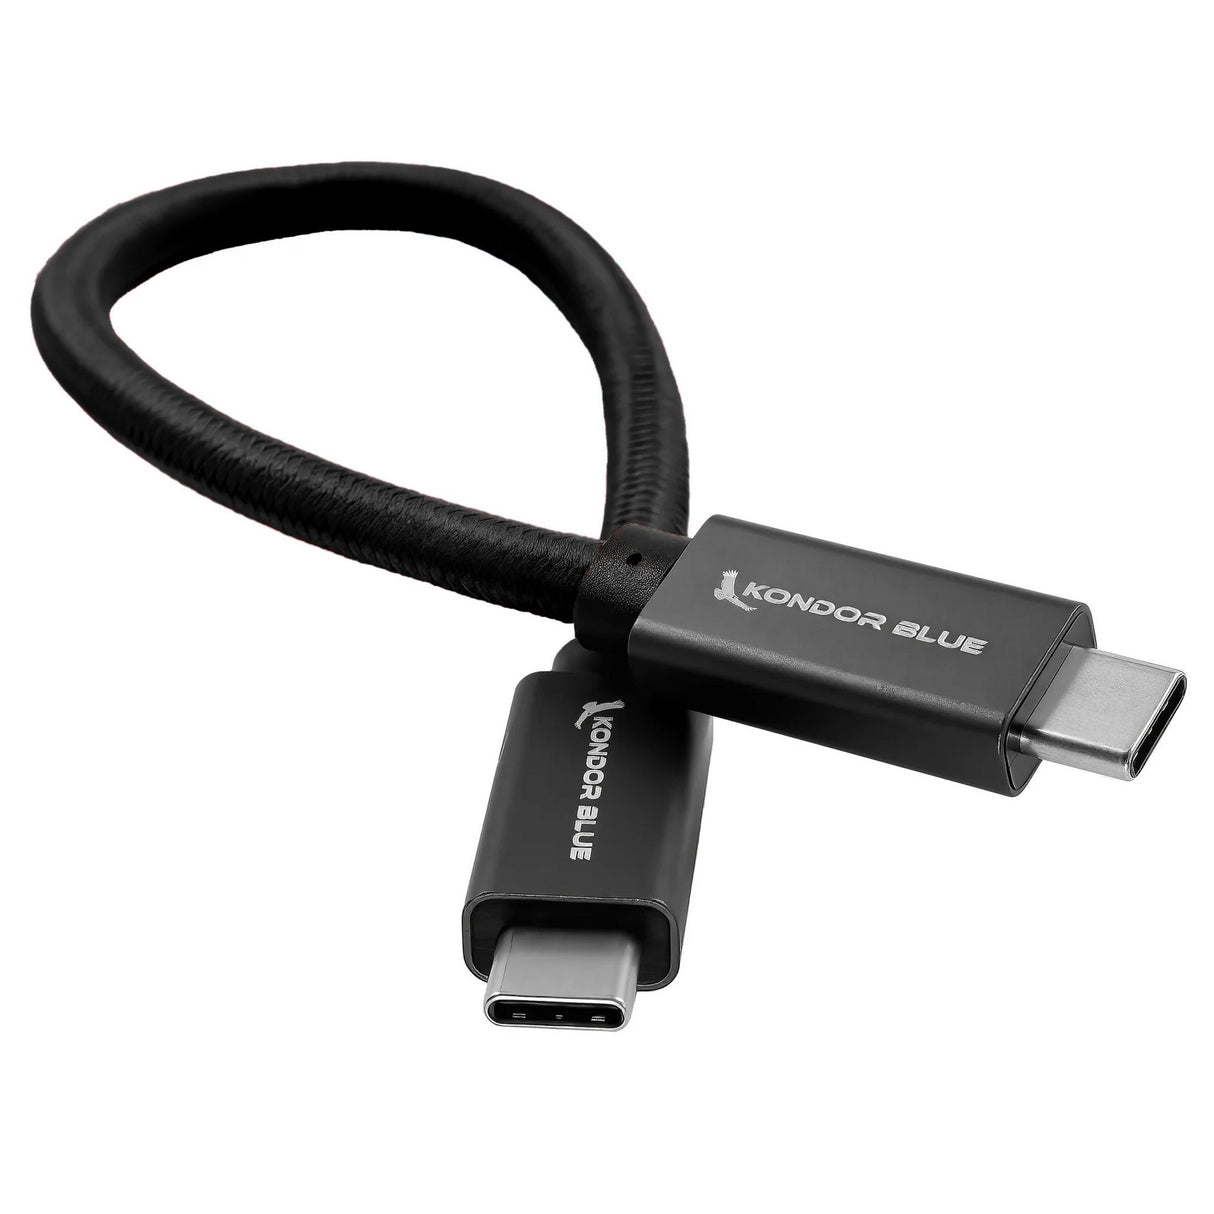 Kondor Blue USB C to USB C High Speed Cable for SSD Recording, Raven Black